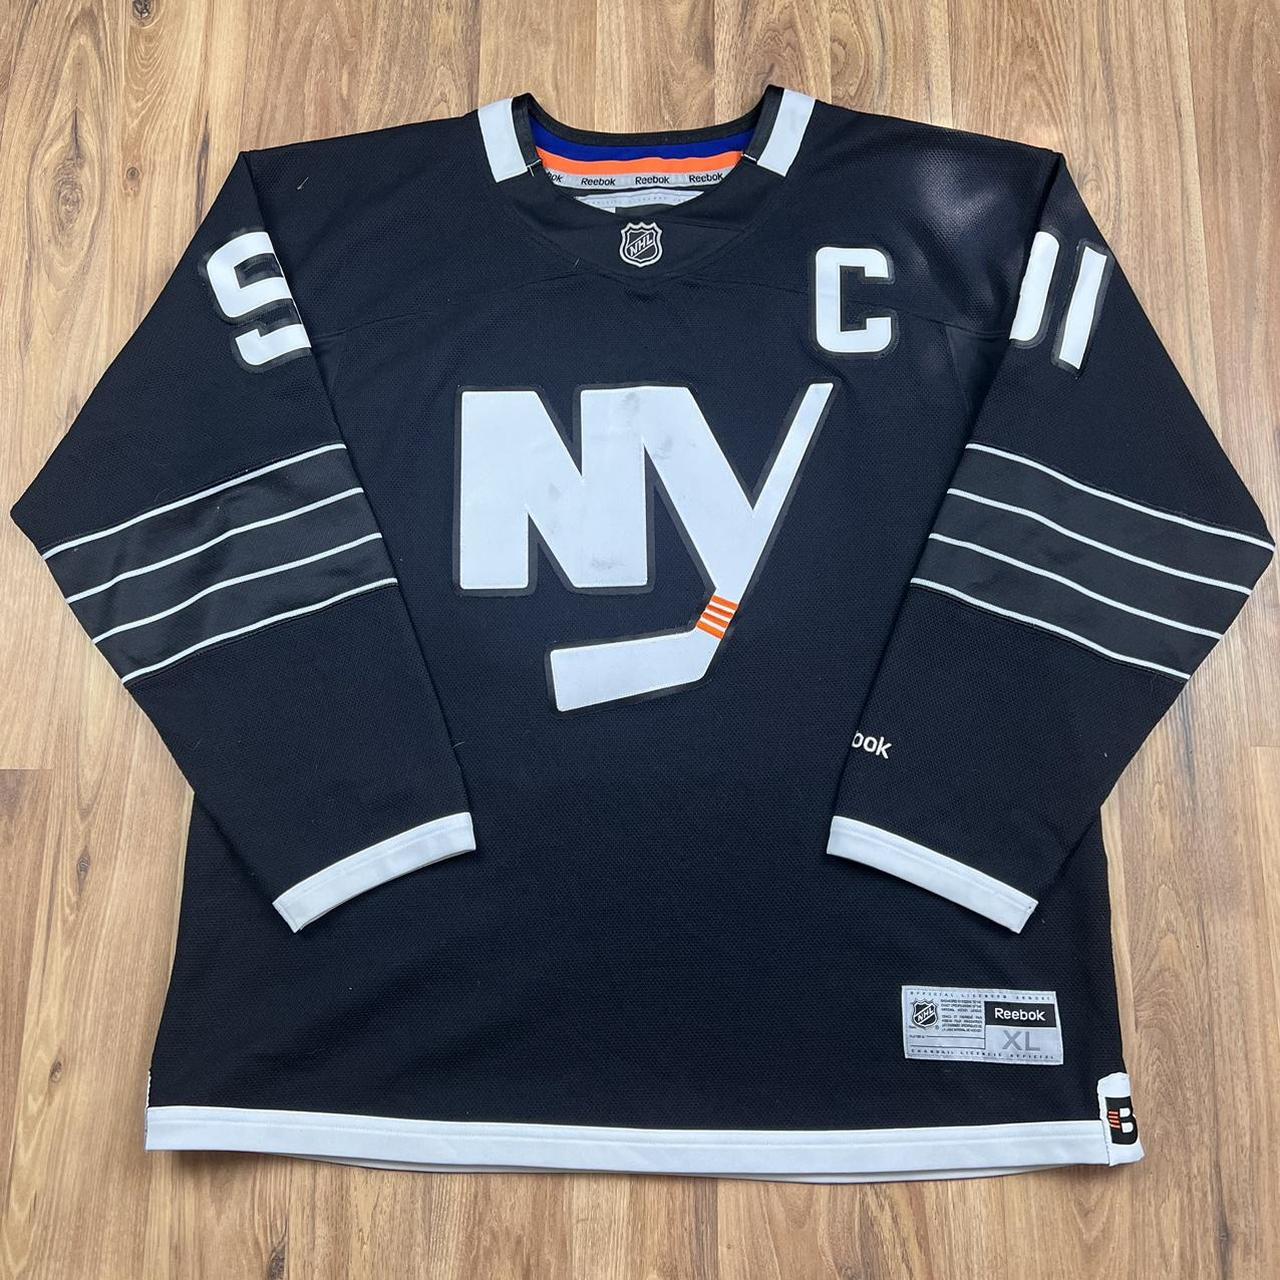 NY Islanders To Get A Black & White Brooklyn Jersey?